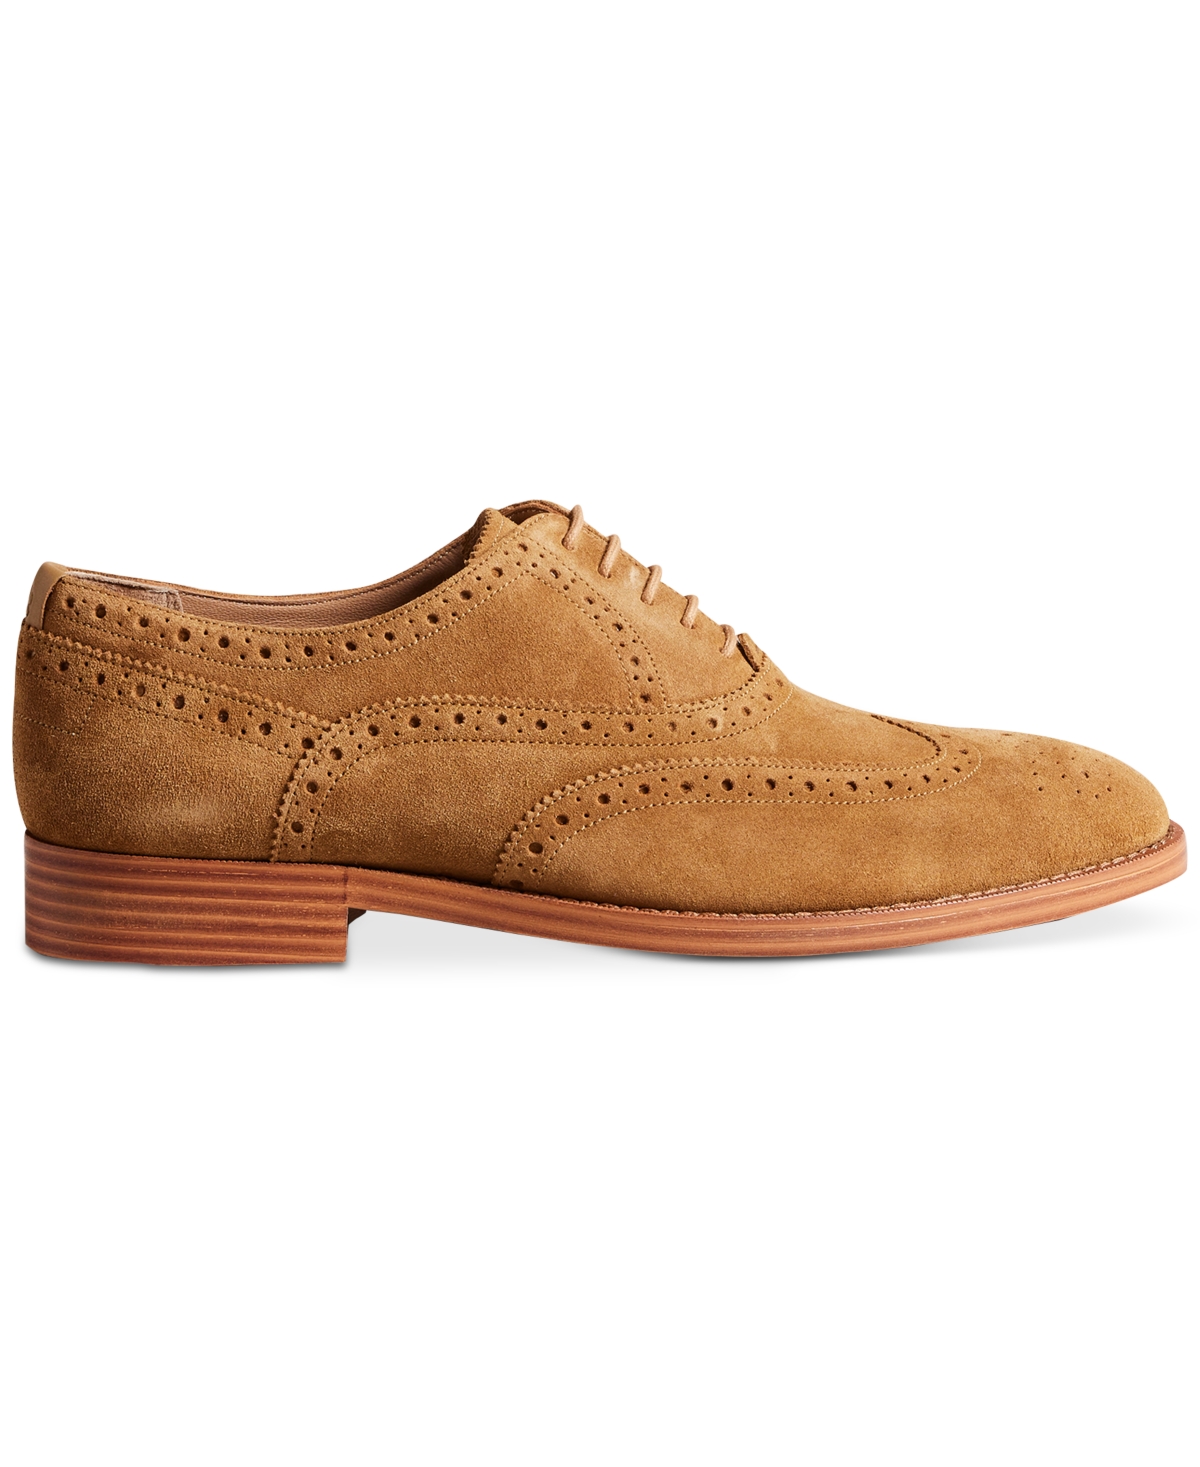 Ted Baker Mens Tan Ammais Perforated Suede Brogues